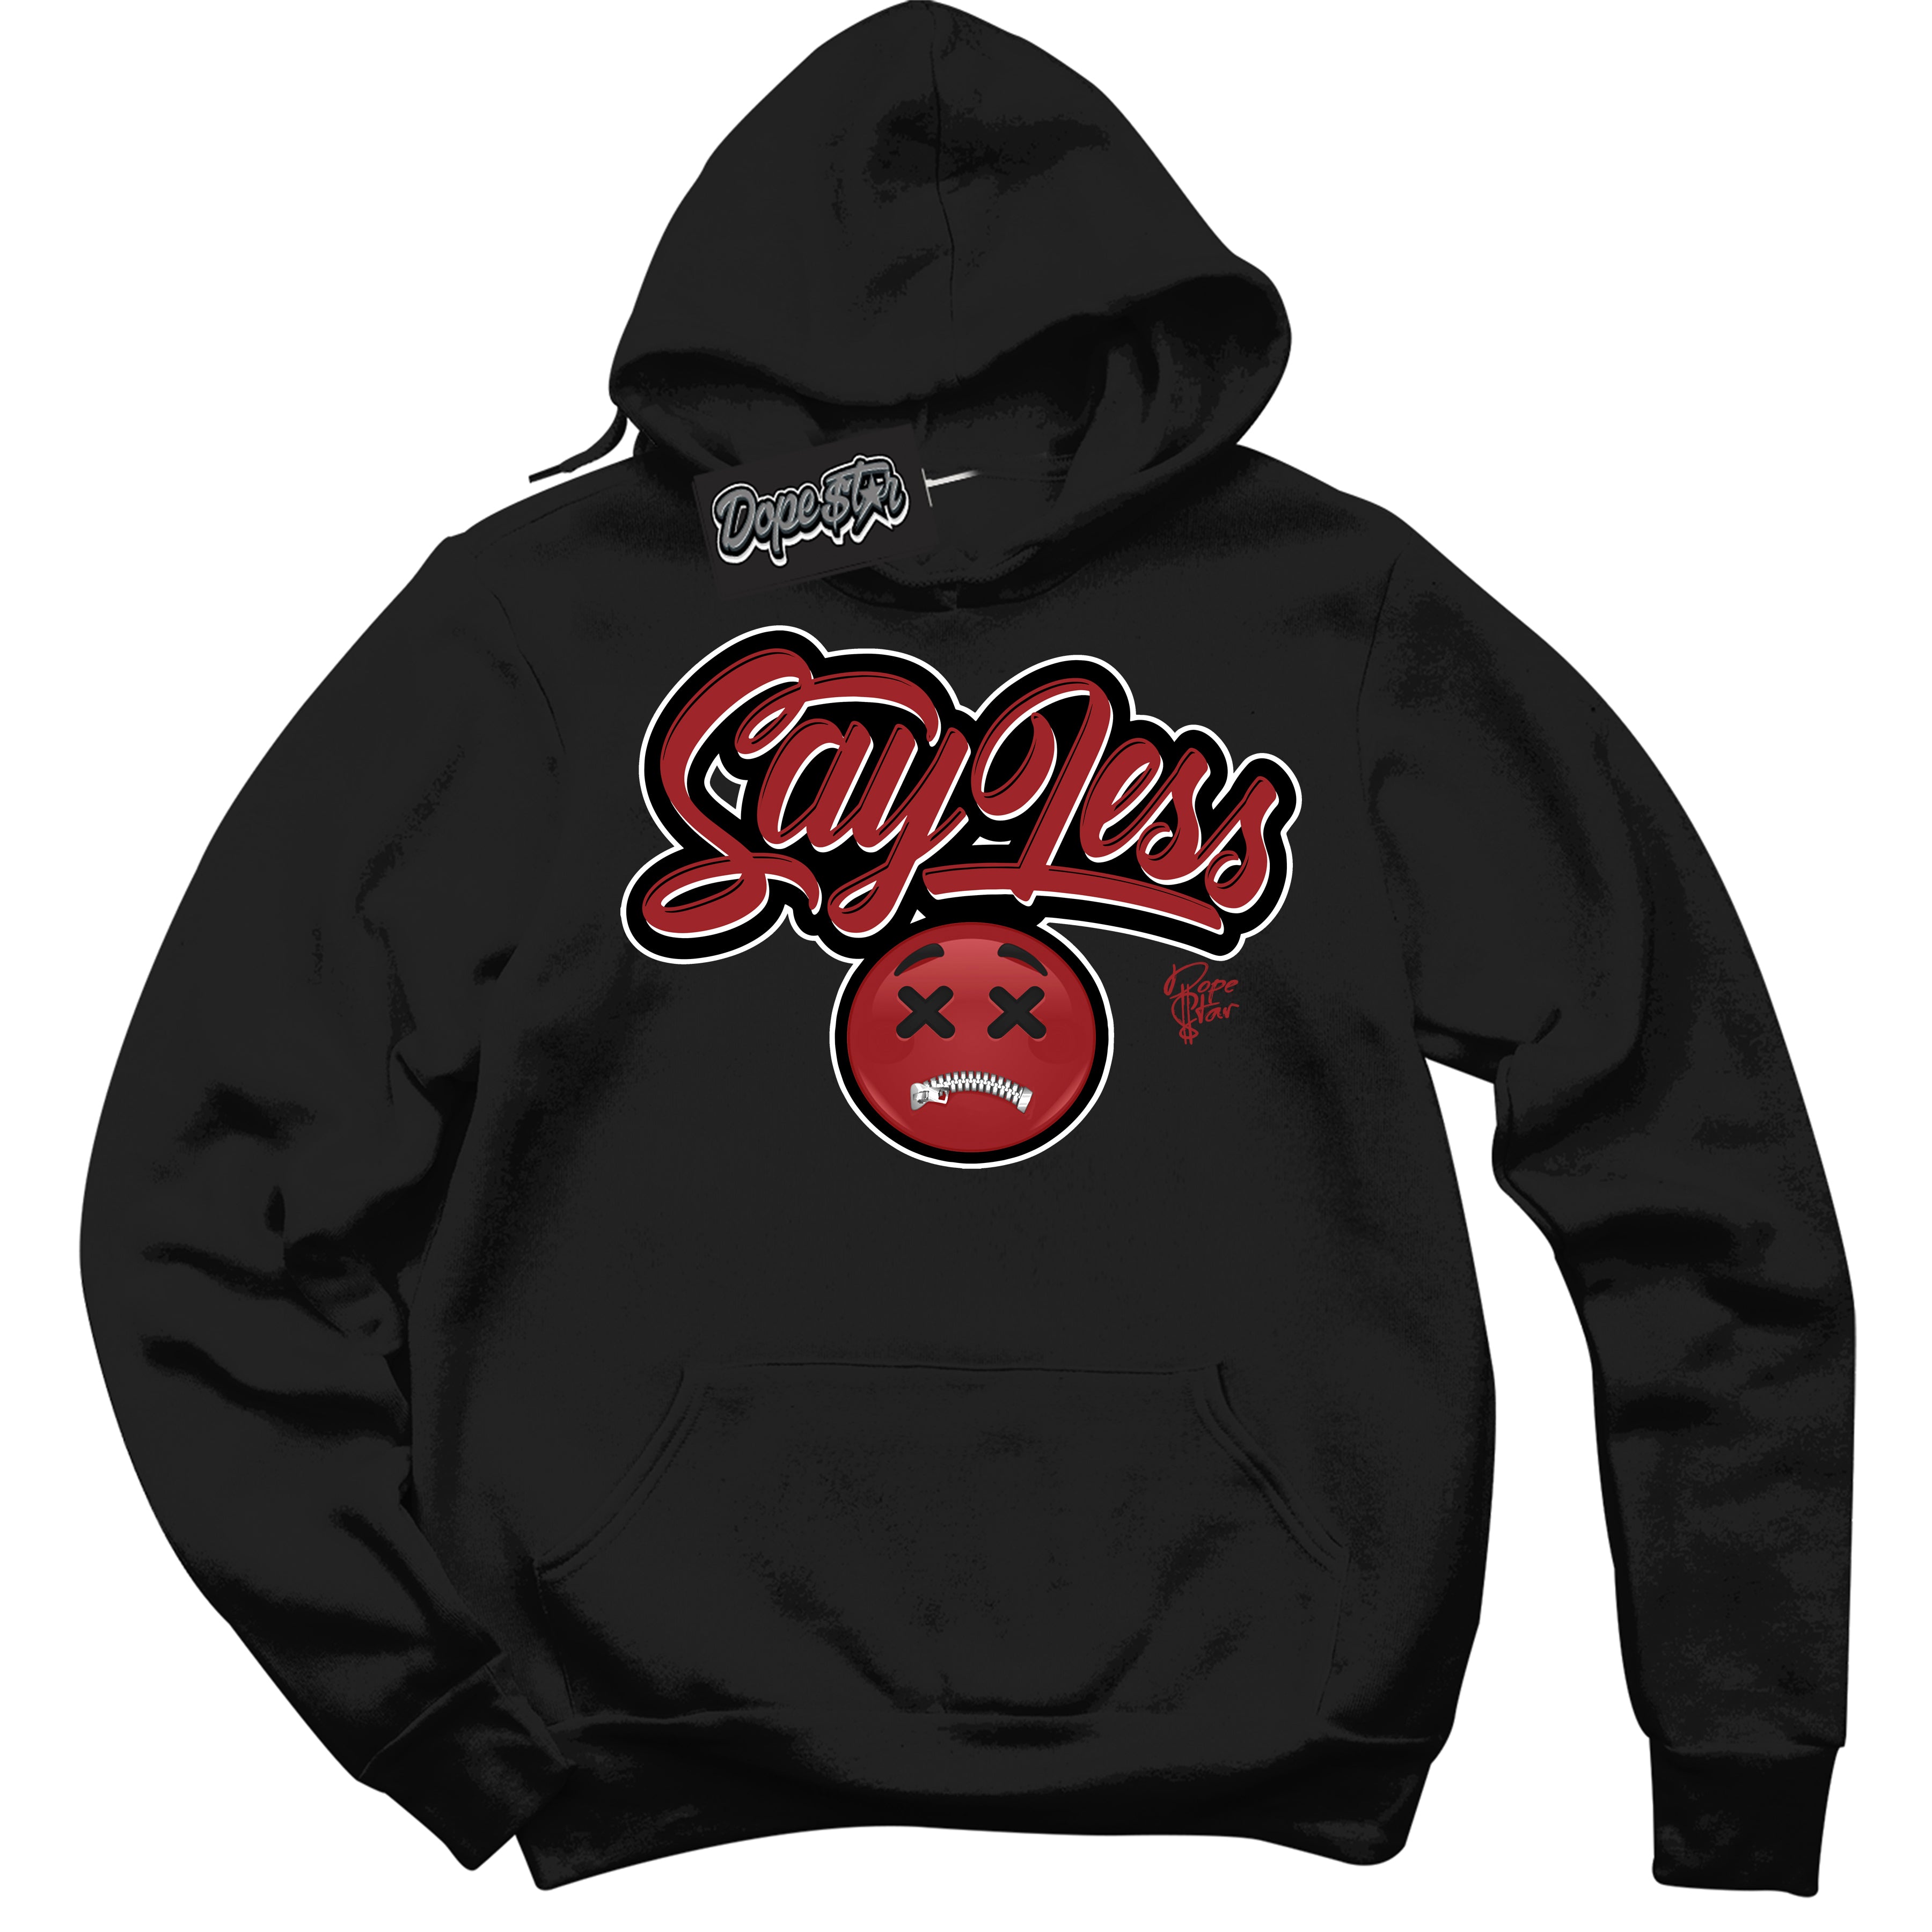 Cool Black Hoodie With “ Say Less “ Design That Perfectly Matches Lost And Found 1s Sneakers